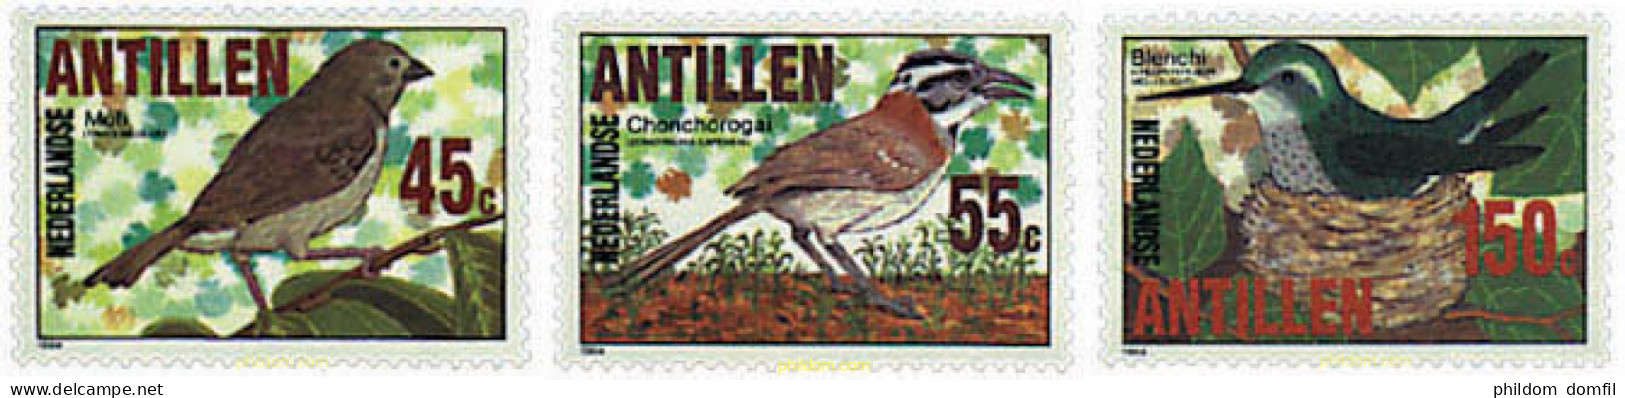 32225 MNH ANTILLAS HOLANDESAS 1984 AVES - West Indies